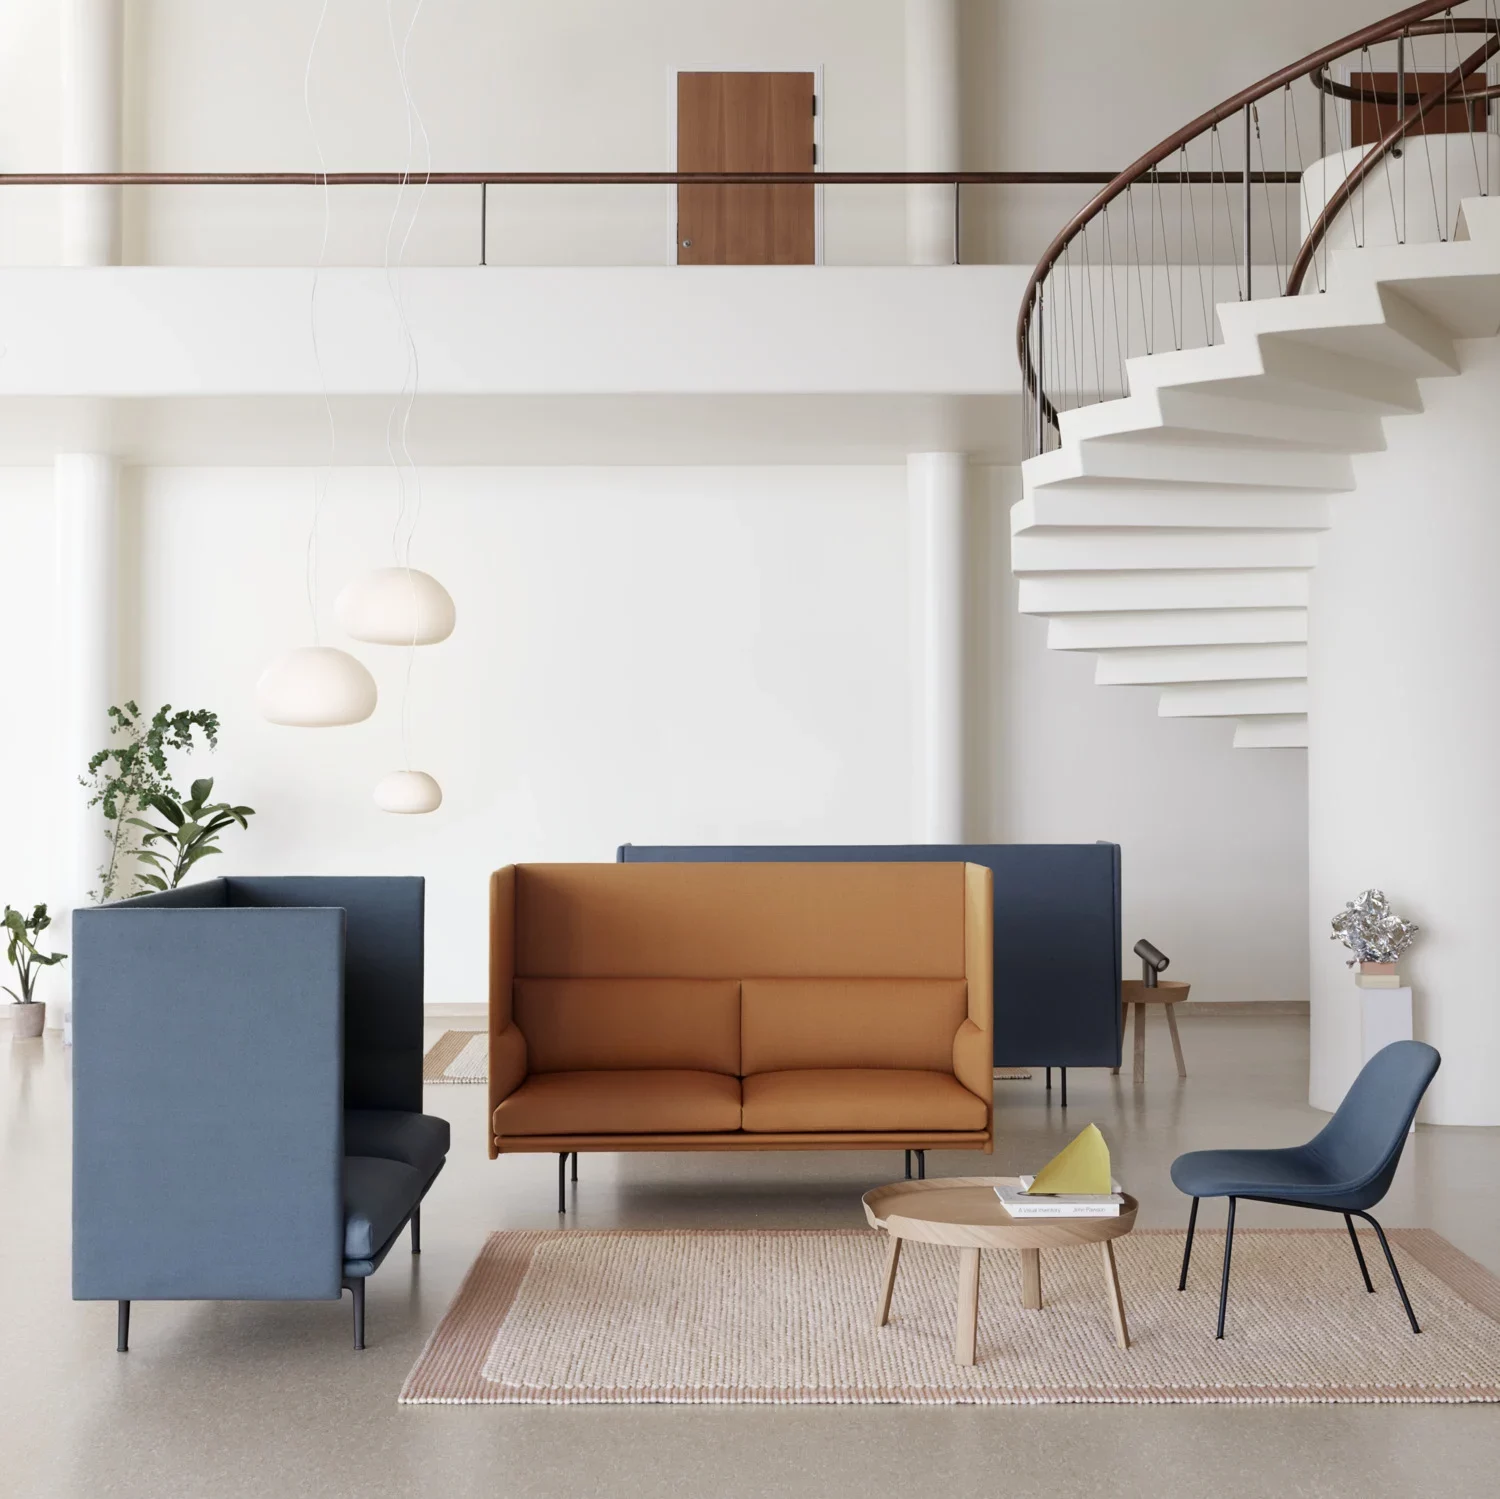 An airy, modern living space featuring a spiral staircase with wooden steps on the right. Below the staircase is a minimalist interior setting with a tan leather sofa and a deep blue armchair, both with contrasting frames.